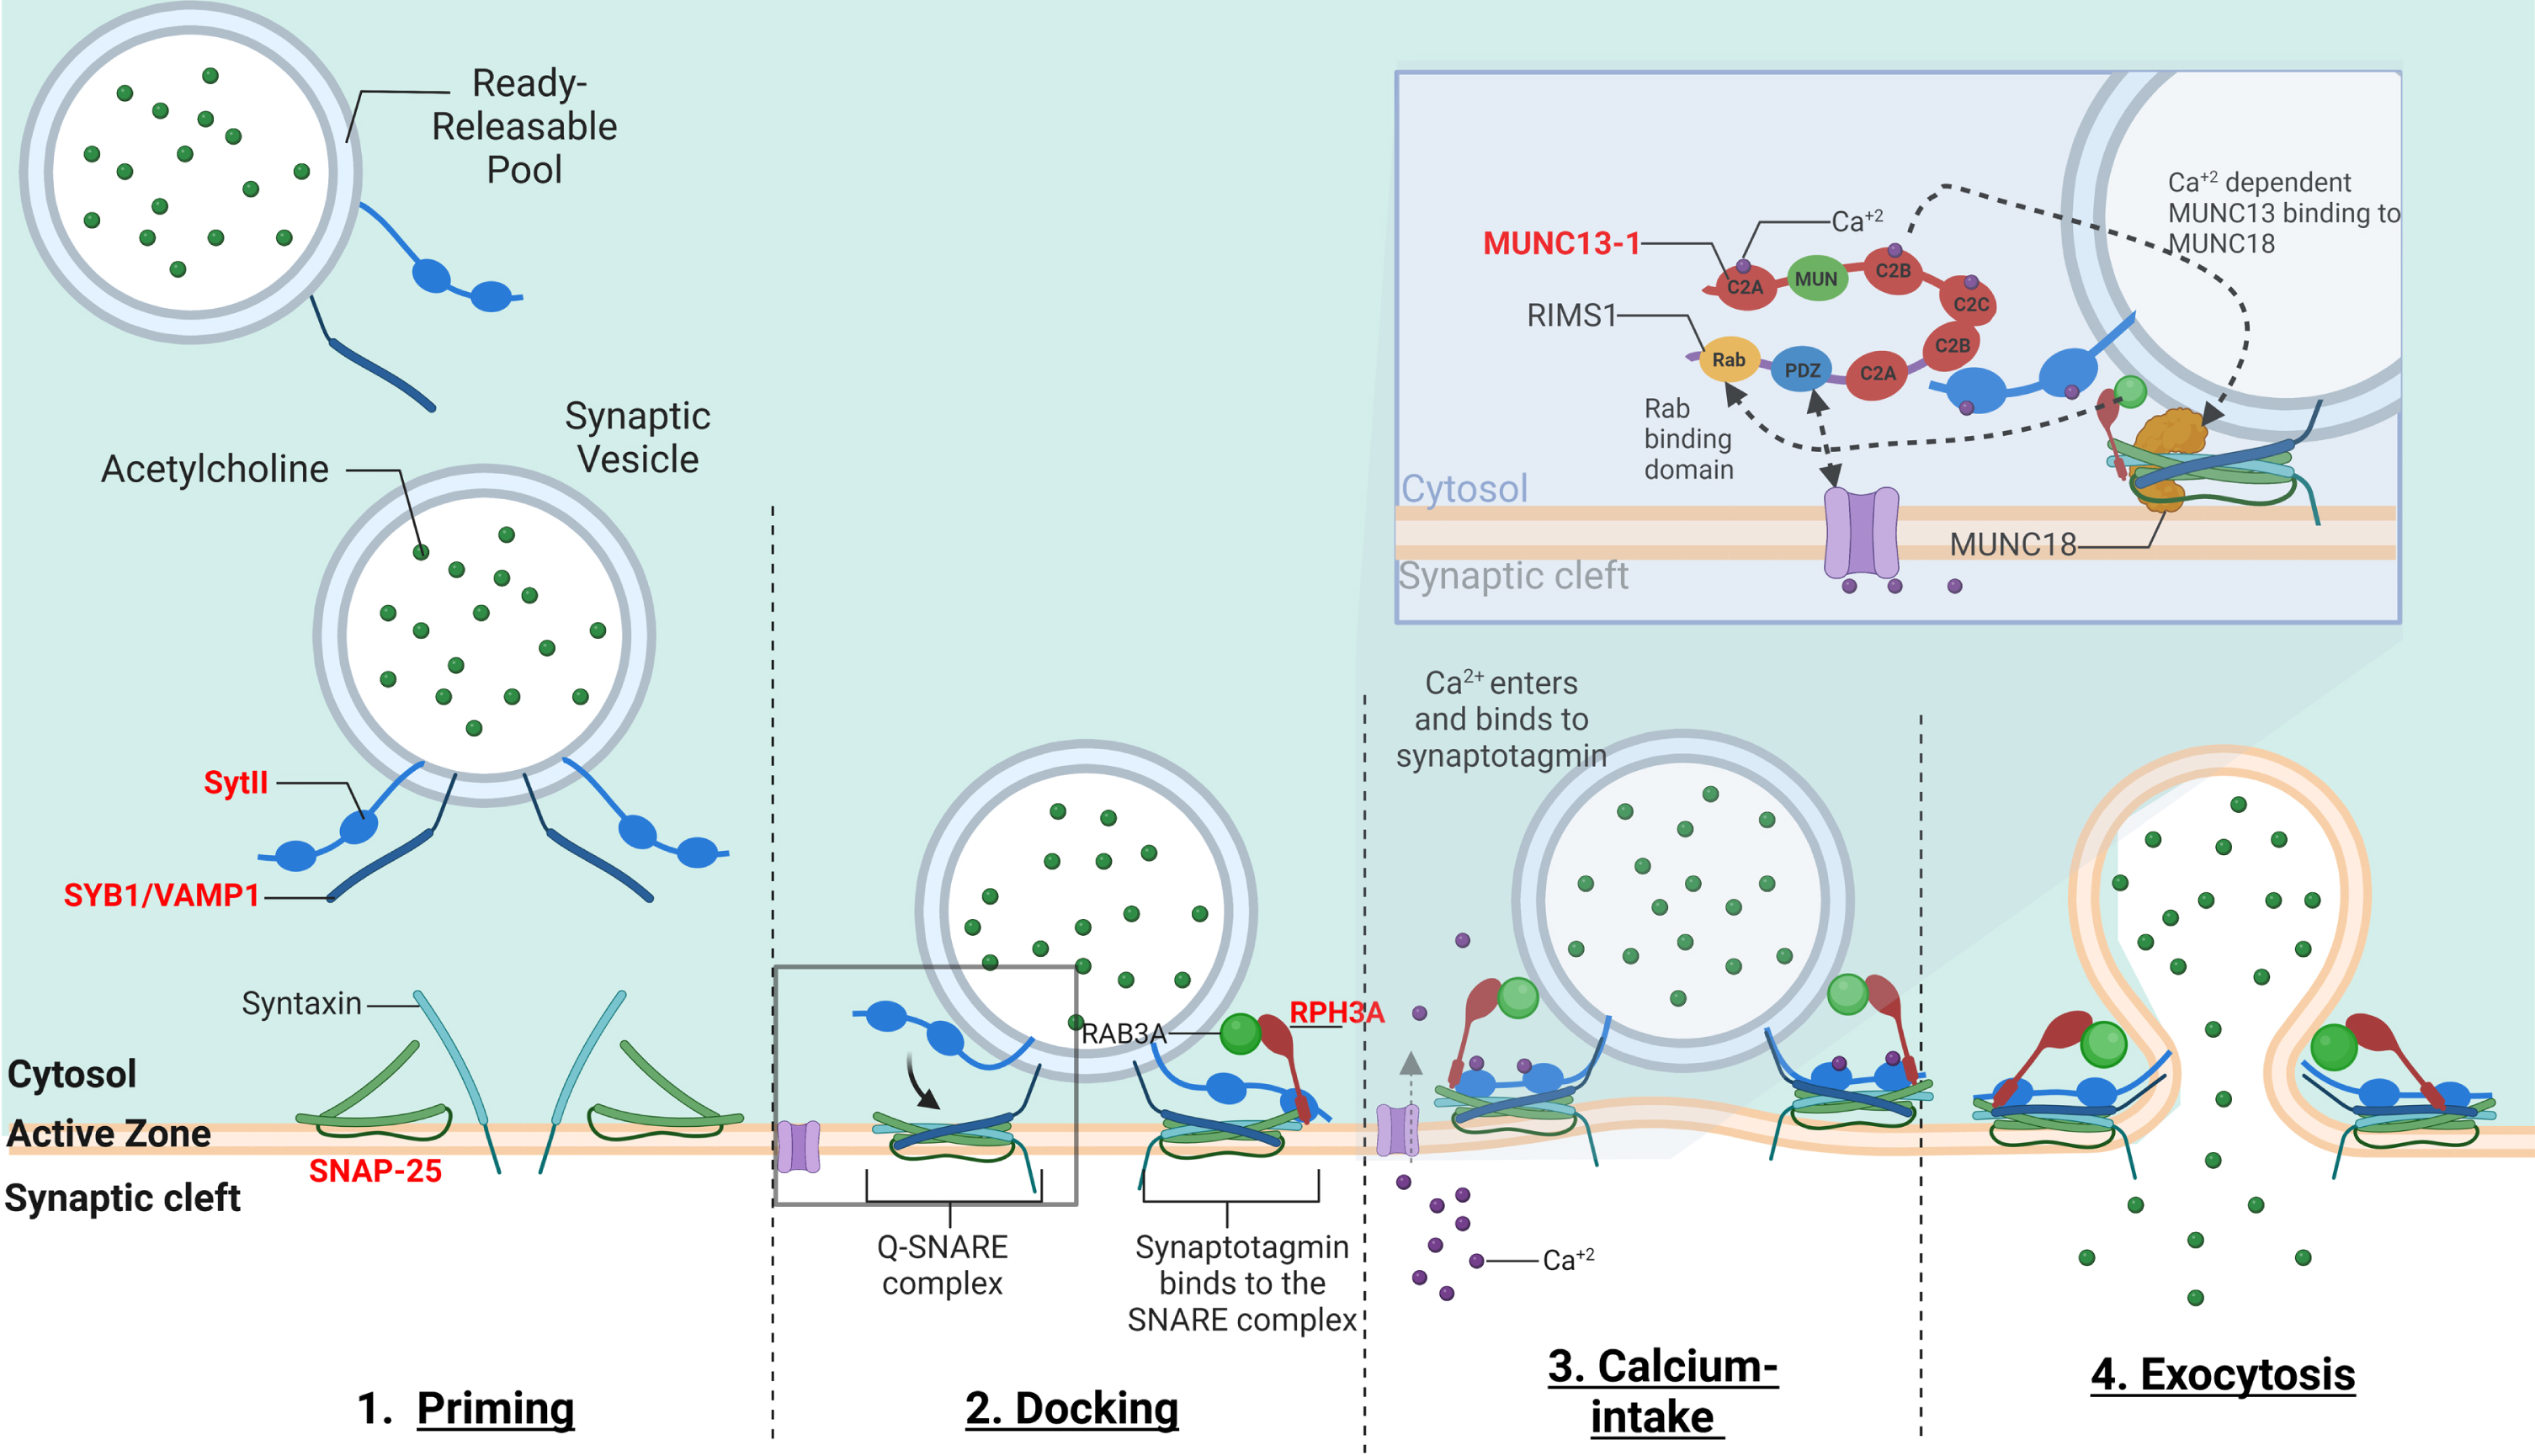 –The mechanism of calcium-dependent synaptic vesicle exocytosis at the NMJ: The ready releasable pool (RRPs) of synaptic vesicles containing ACh. When activated, the synaptic vesicle moves towards the pre-synaptic membrane terminal where calcium influx releases the synaptic vesicle bound to actin and other cytoskeletal elements (not shown in image). The “Active Zone” is the area at the pre-synaptic terminal membrane where exocytosis occurs. 1. The pool of synaptic vesicles is termed the “readily releasable pool” (RRP) and is necessary to respond to an electrical impulse. Synaptotagmin II (SytII) and Synaptobrevin/VAMP1 (SYB1/VAMP1) proteins attach to the outer synaptic vesicle membrane forming the soluble N-ethylmaleimide-sensitive factor (NSF) attachment protein receptor (SNARE) complex. The cell membrane contains SNAP-25 and syntaxin components essential to the fusion of the vesicle and the cell membrane. 2. Docking –Here as the synaptic vesicle moves closer to the cell membrane, the SNARE complex begins to form 3. When an action potential depolarizes the pre-synaptic membrane, this causes the excitation of voltage-gated calcium channels and calcium entry. Calcium binds to both C2-domains (C2a and C2b) of SytII which induces a simultaneous binding of the vesicle to the cell membrane while completing the formation of the SNARE complex. Calcium induced binding of the SNARE complex requires additional proteins for vesicle exocytosis. MUNC18-1 inhibits the formation of the SNARE complex, locking syntaxin in a closed conformation, upon calcium induction MUNC18-1 interacts with MUNC13-1 opening the syntaxin conformation enabling the formation of the SNARE complex. This change in syntaxin conformation enables the binding of SYB1/VAMP1 initiating the fusion of the synaptic vesicle and cell membrane. In addition, MUNC13-1 contains C1, C2A, C2B, and C2 C domains which sequester calcium. MUNC13-1 also contains a central MUN domain. Importantly, Rab3-interacting molecule (RIMS1), which serves as an active zone scaffolding protein has been shown to interact with proteins ELKs and RIM-BPs. RIMS1 also interacts with MUNC13-1 by preventing homodimerization and recruiting MUNC13 s towards the active zone. RIMS1 also serves as a key regulator as it acts upon MUNC13 and 18, which are essential in determining the number of release sites and in the fusion of competent vesicles. RIMS1 can interact directly with the voltage-gated calcium channels at the presynaptic membrane, but altering the density of calcium channels present at the active zone, hereby effecting the size of the RRP. 4. The vesicle and cell membrane fuse together, the SNARE complex “zippers” the vesicle tightly to the cell membrane releasing ACh and other proteins into the synaptic cleft. Genes implicated in CMS are in red.